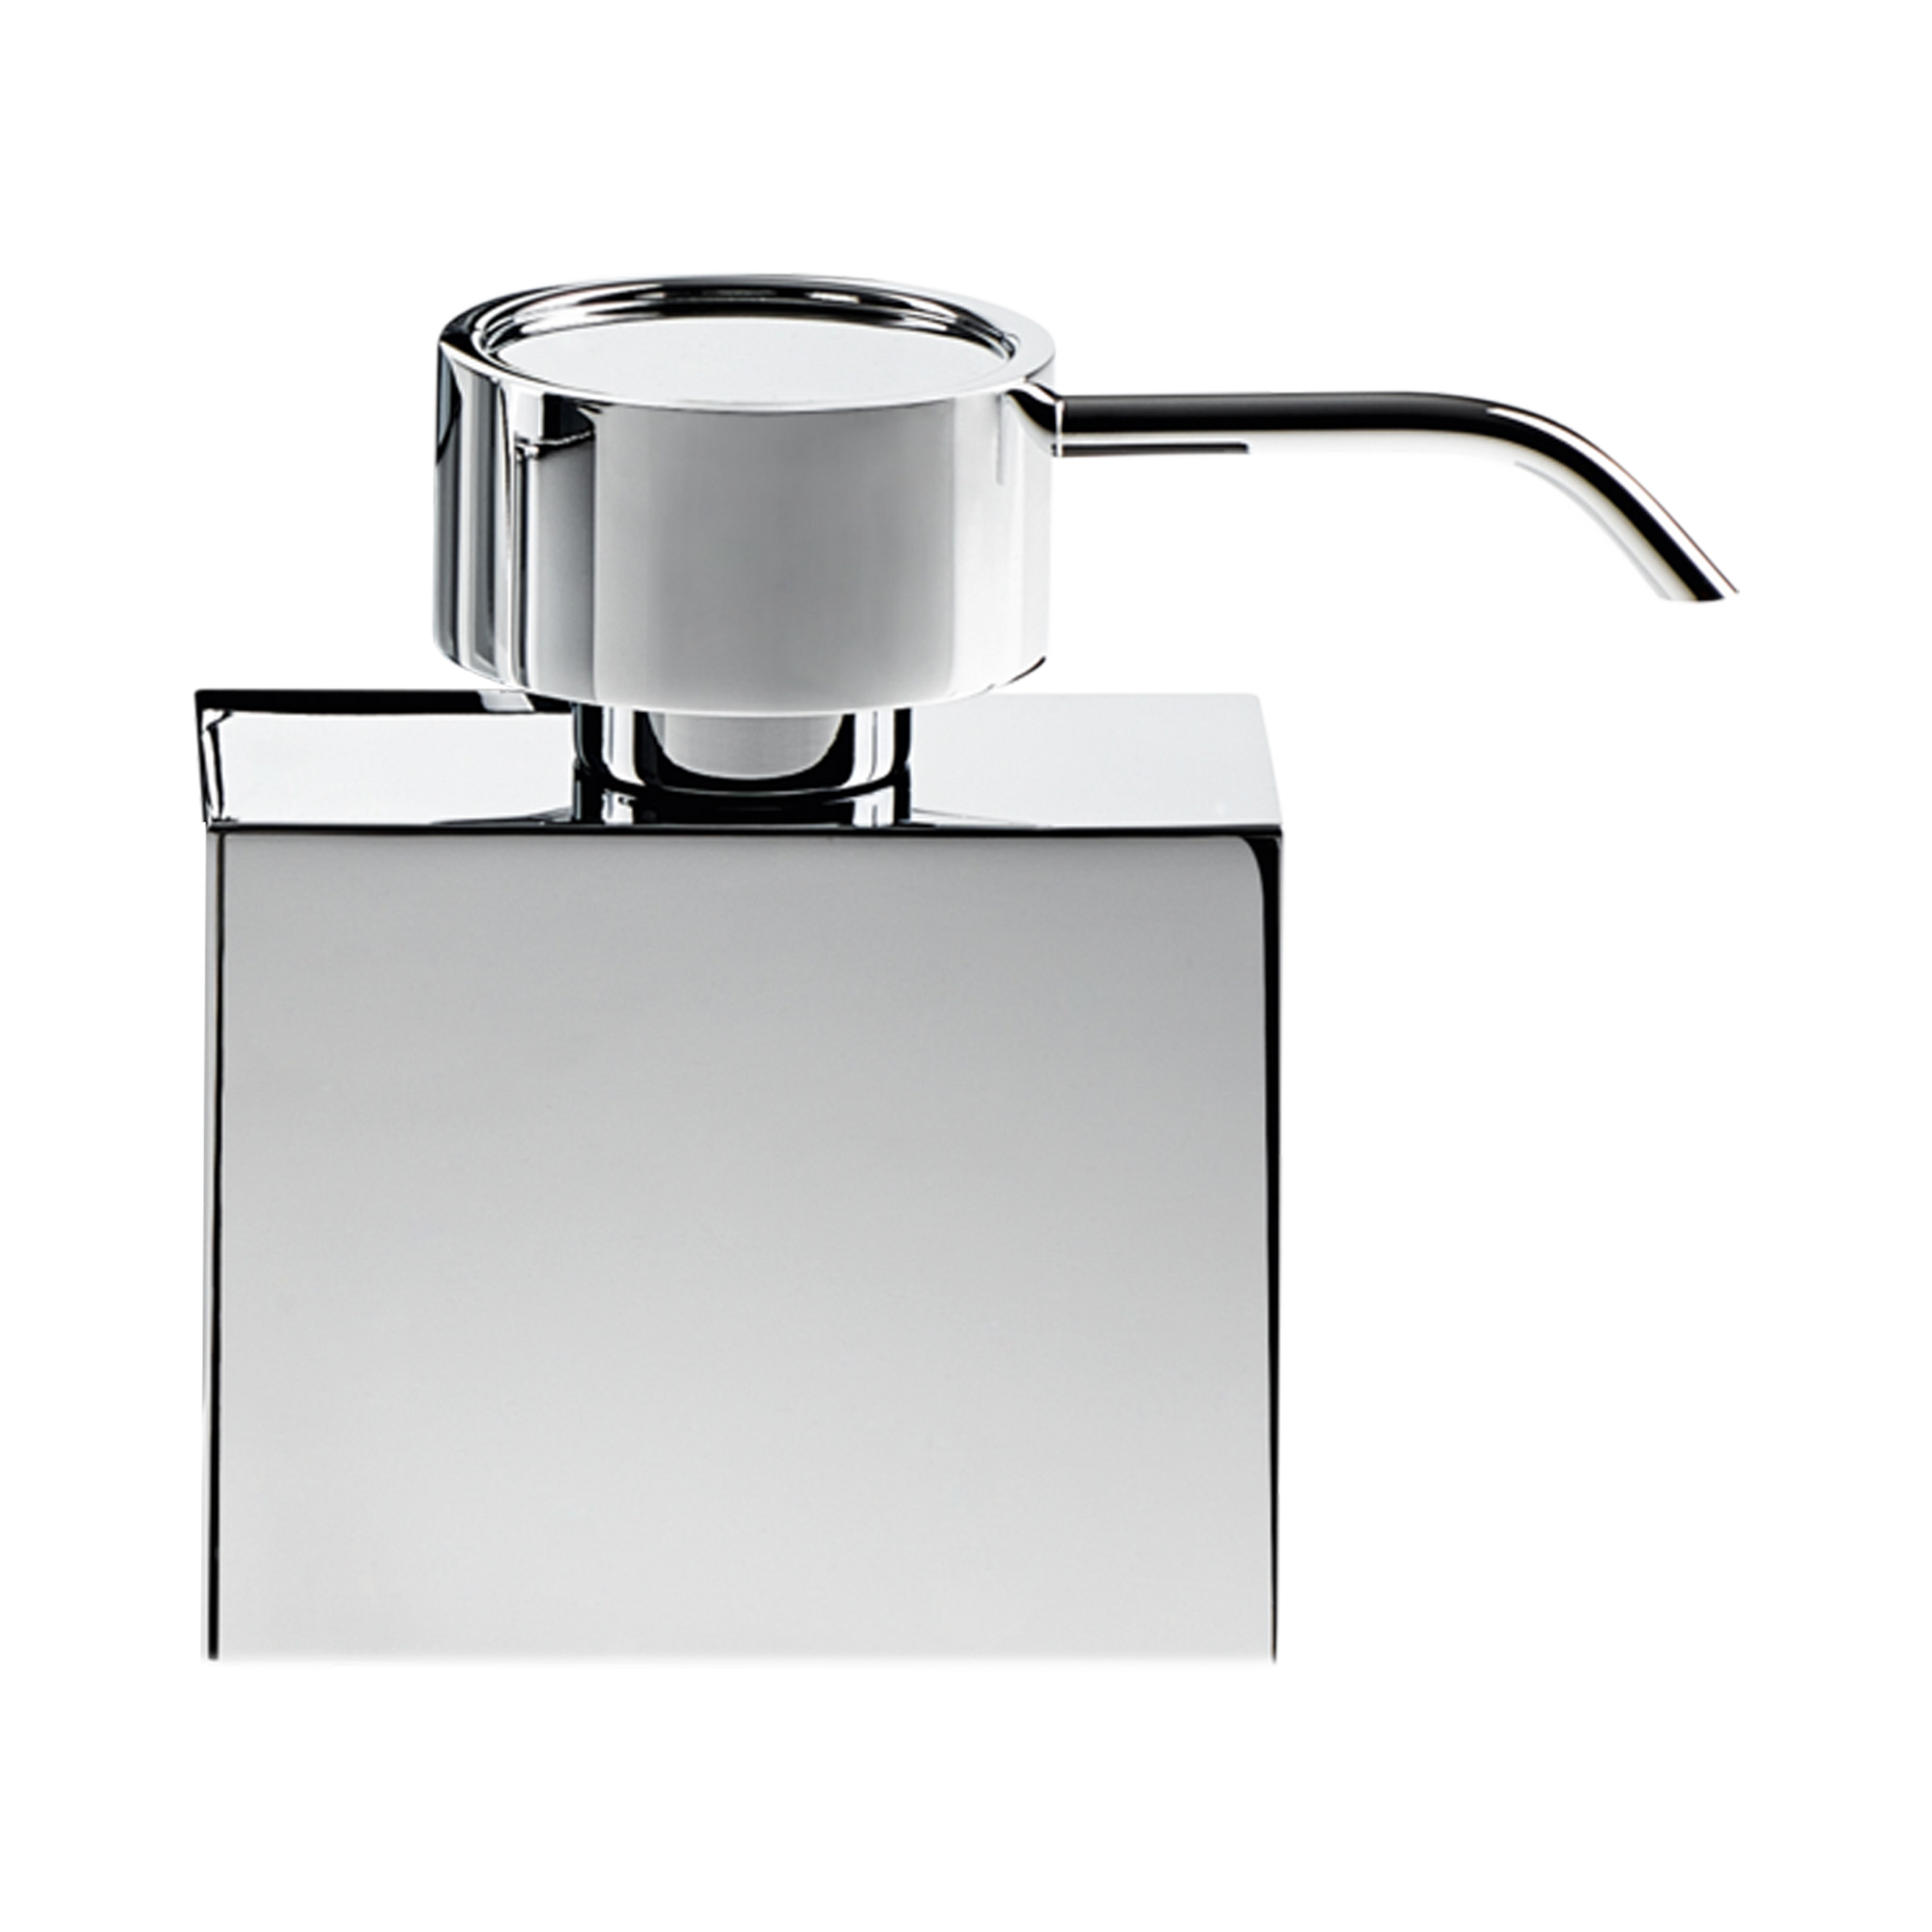 A modern and stylish cubic soap dispenser featured in an elegant chrome finish.